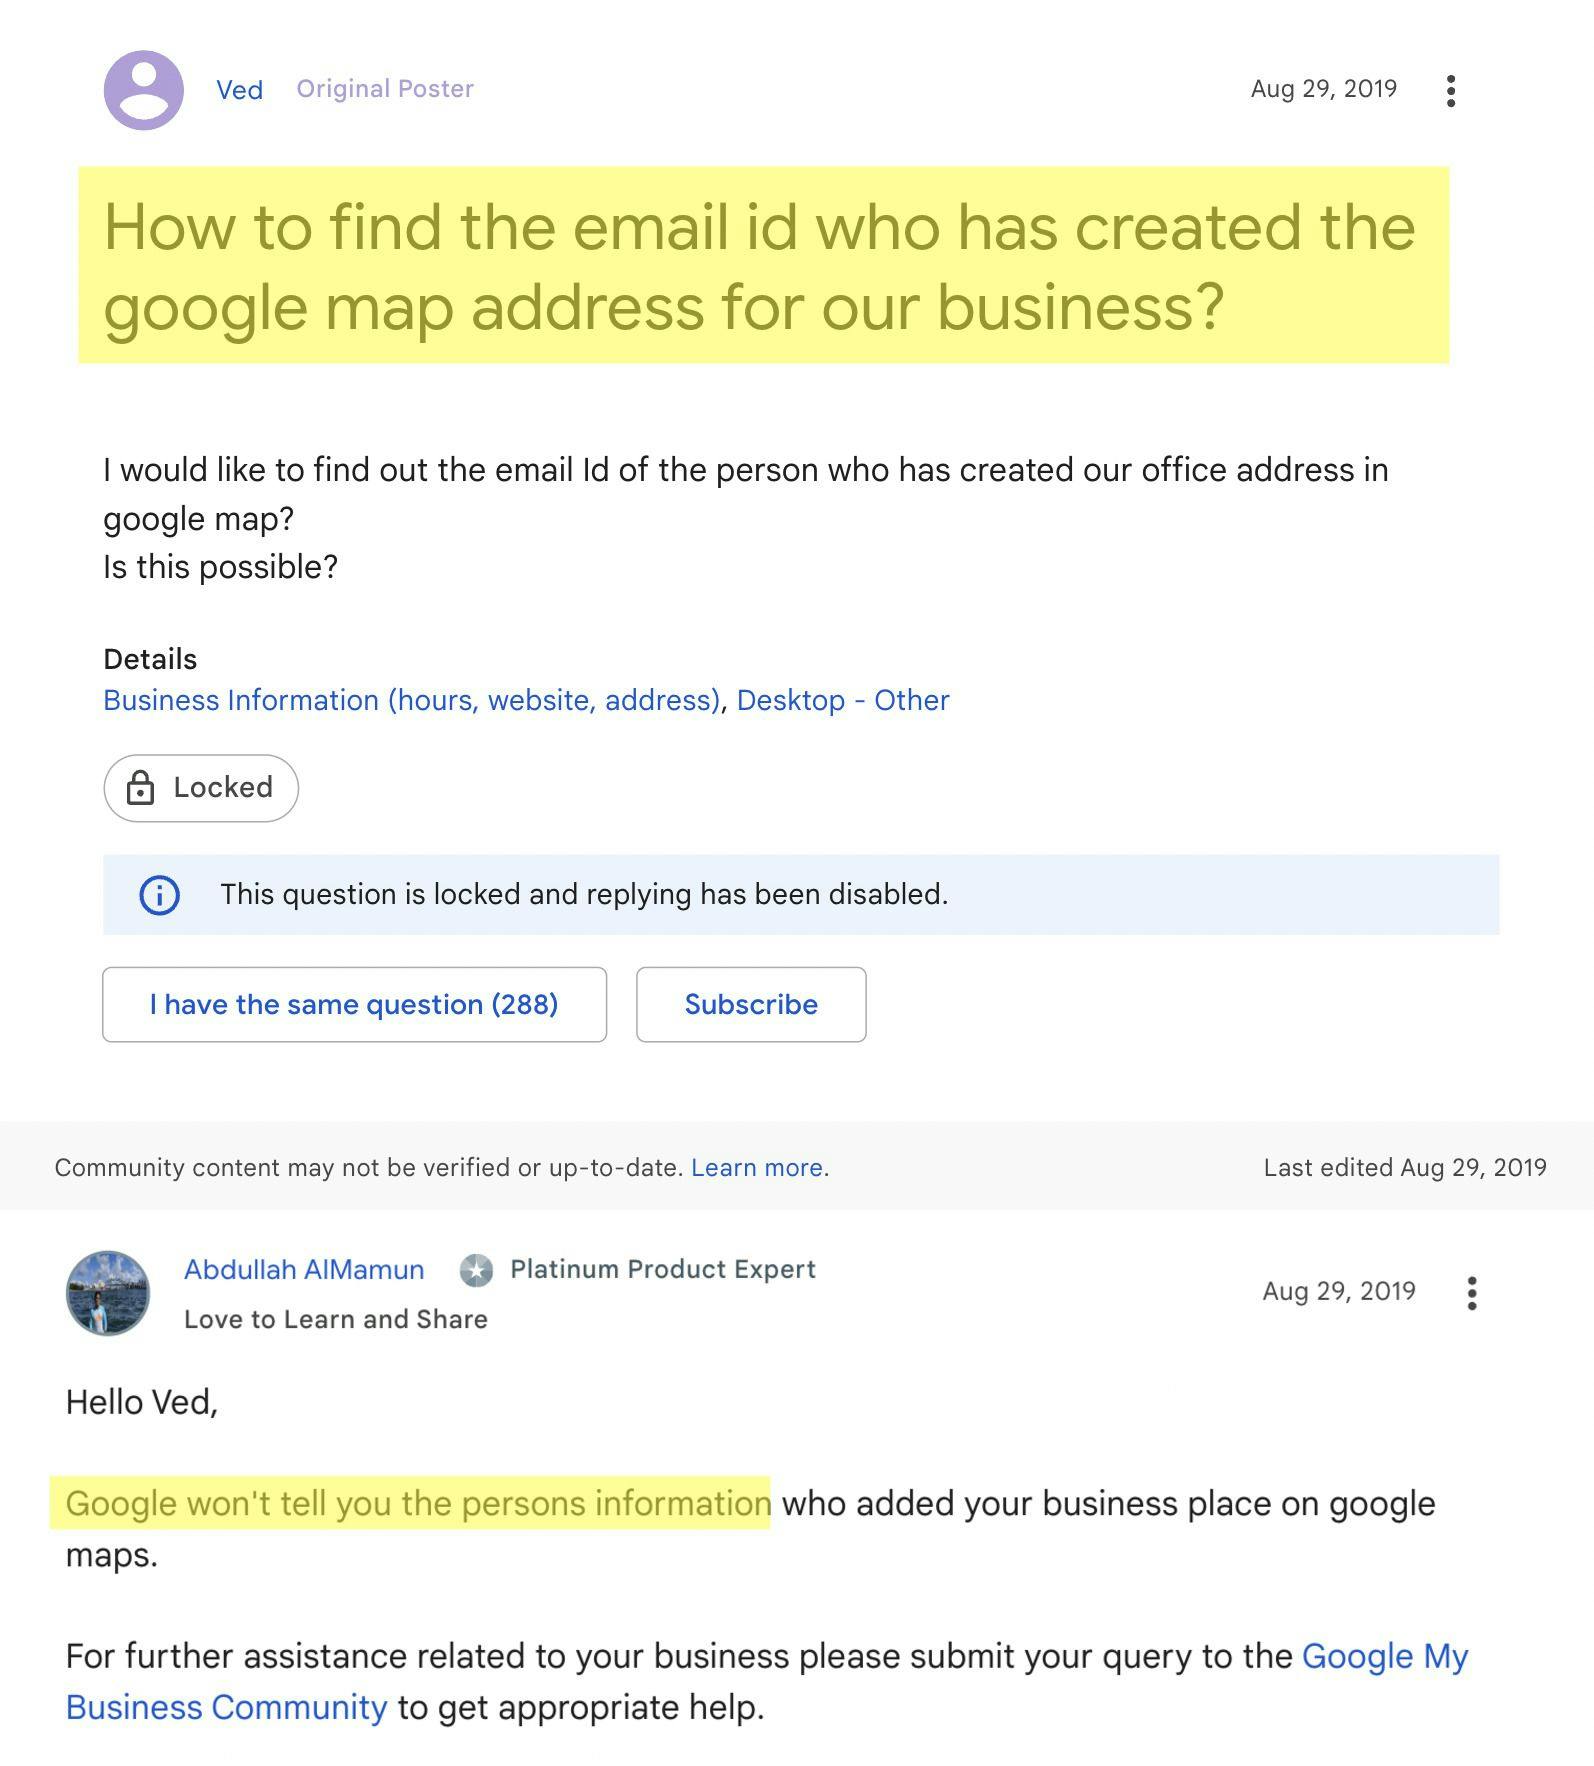 how to find email google forum discussion - image26.jpg